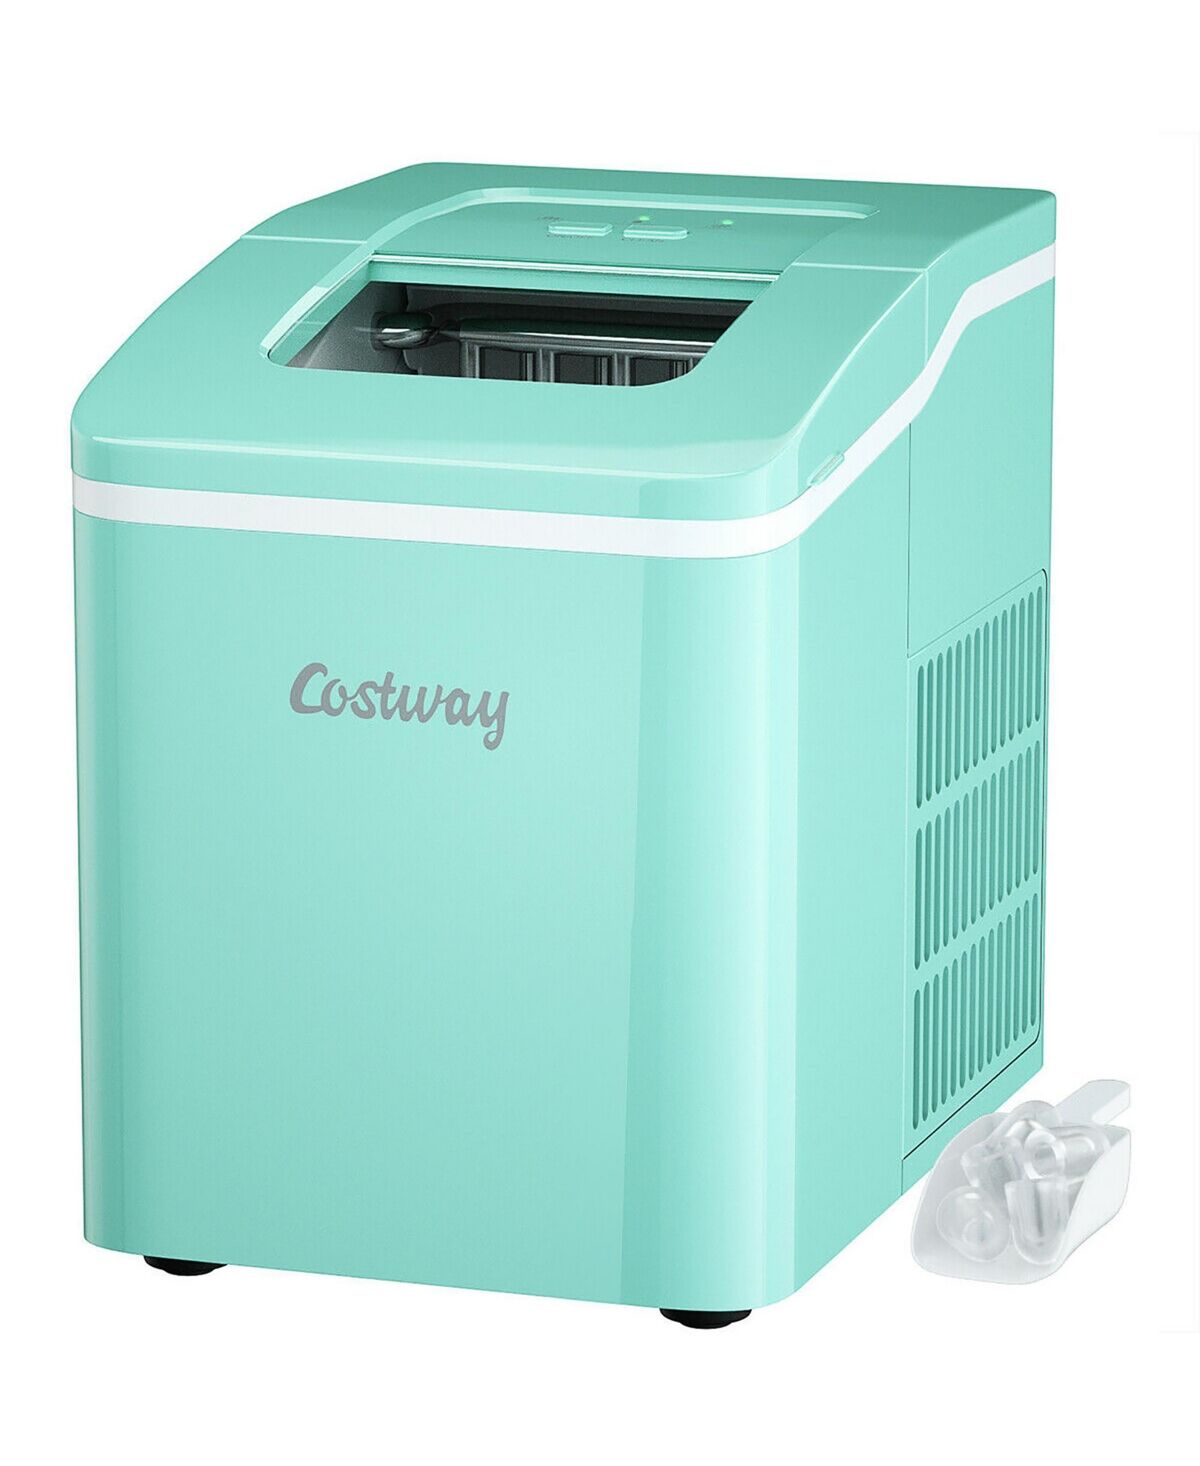 Costway Portable Ice Maker Machine Countertop 26Lbs/24H Self-cleaning - Green